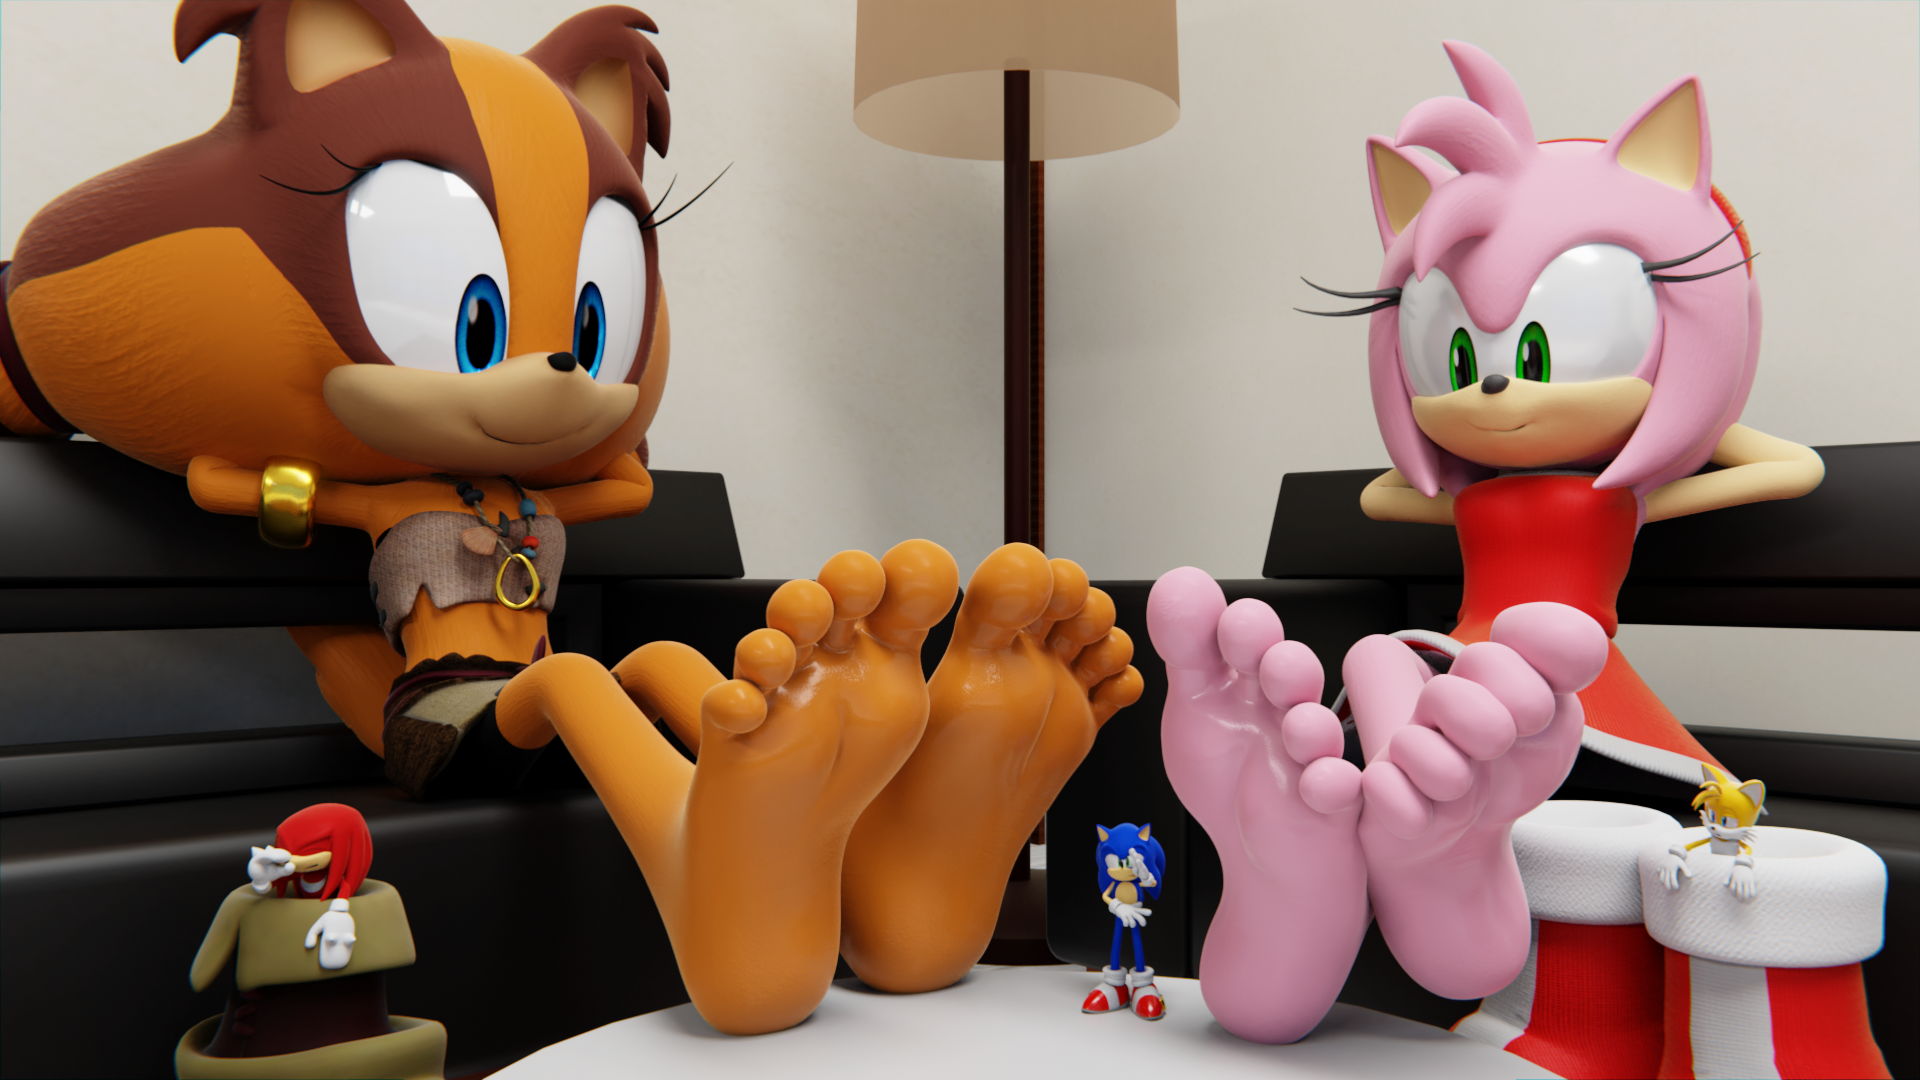 Amy rose shoes